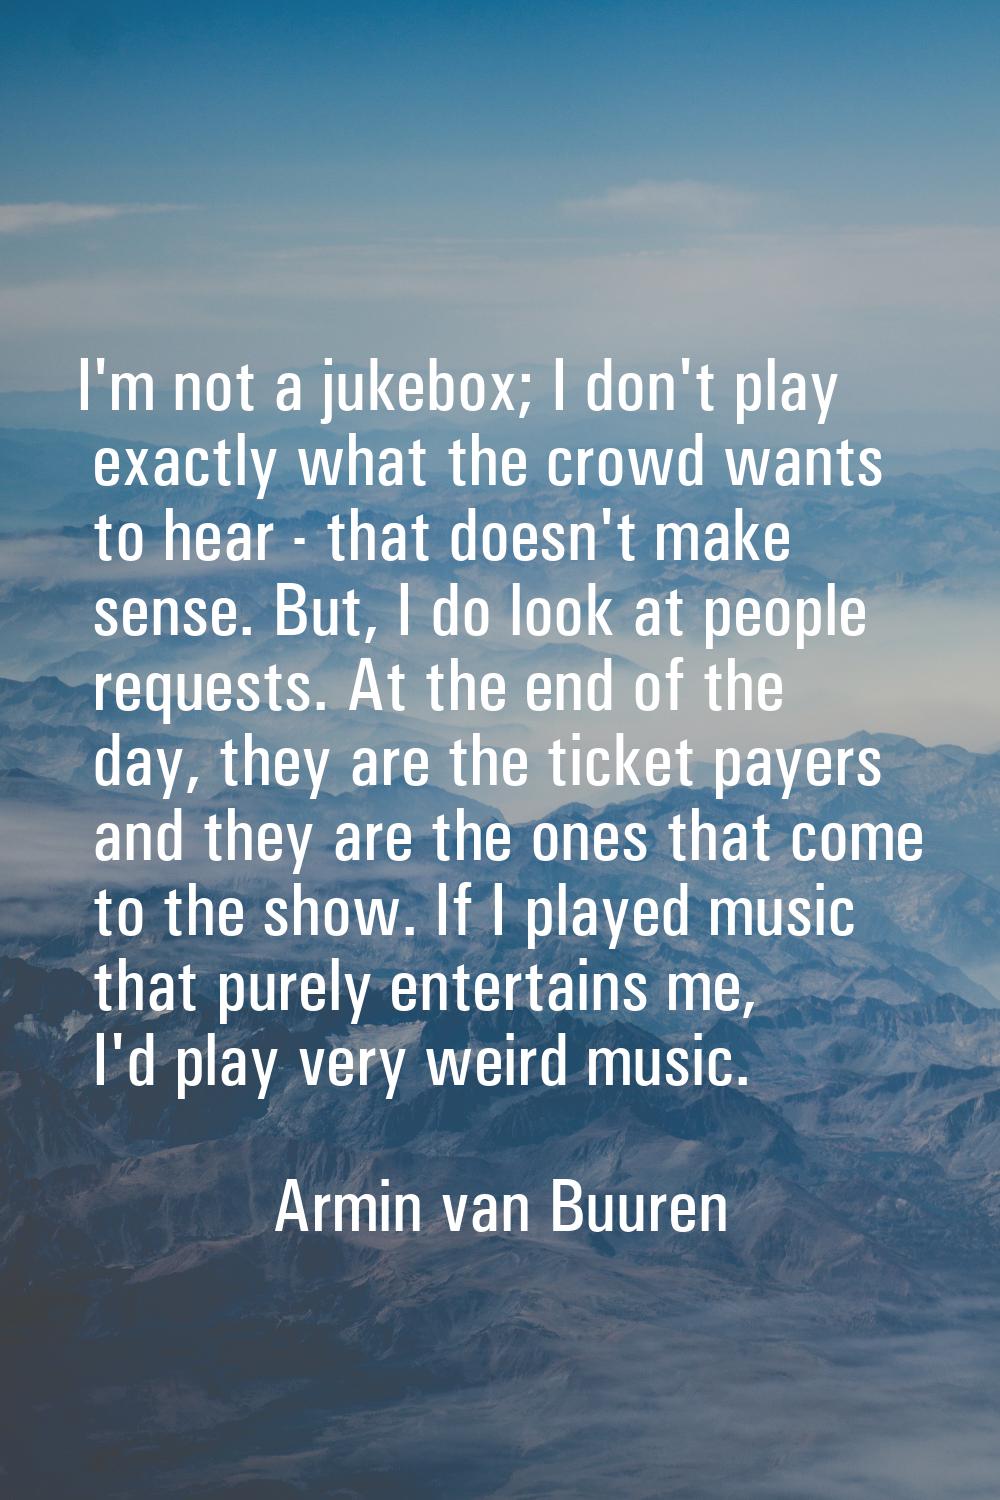 I'm not a jukebox; I don't play exactly what the crowd wants to hear - that doesn't make sense. But